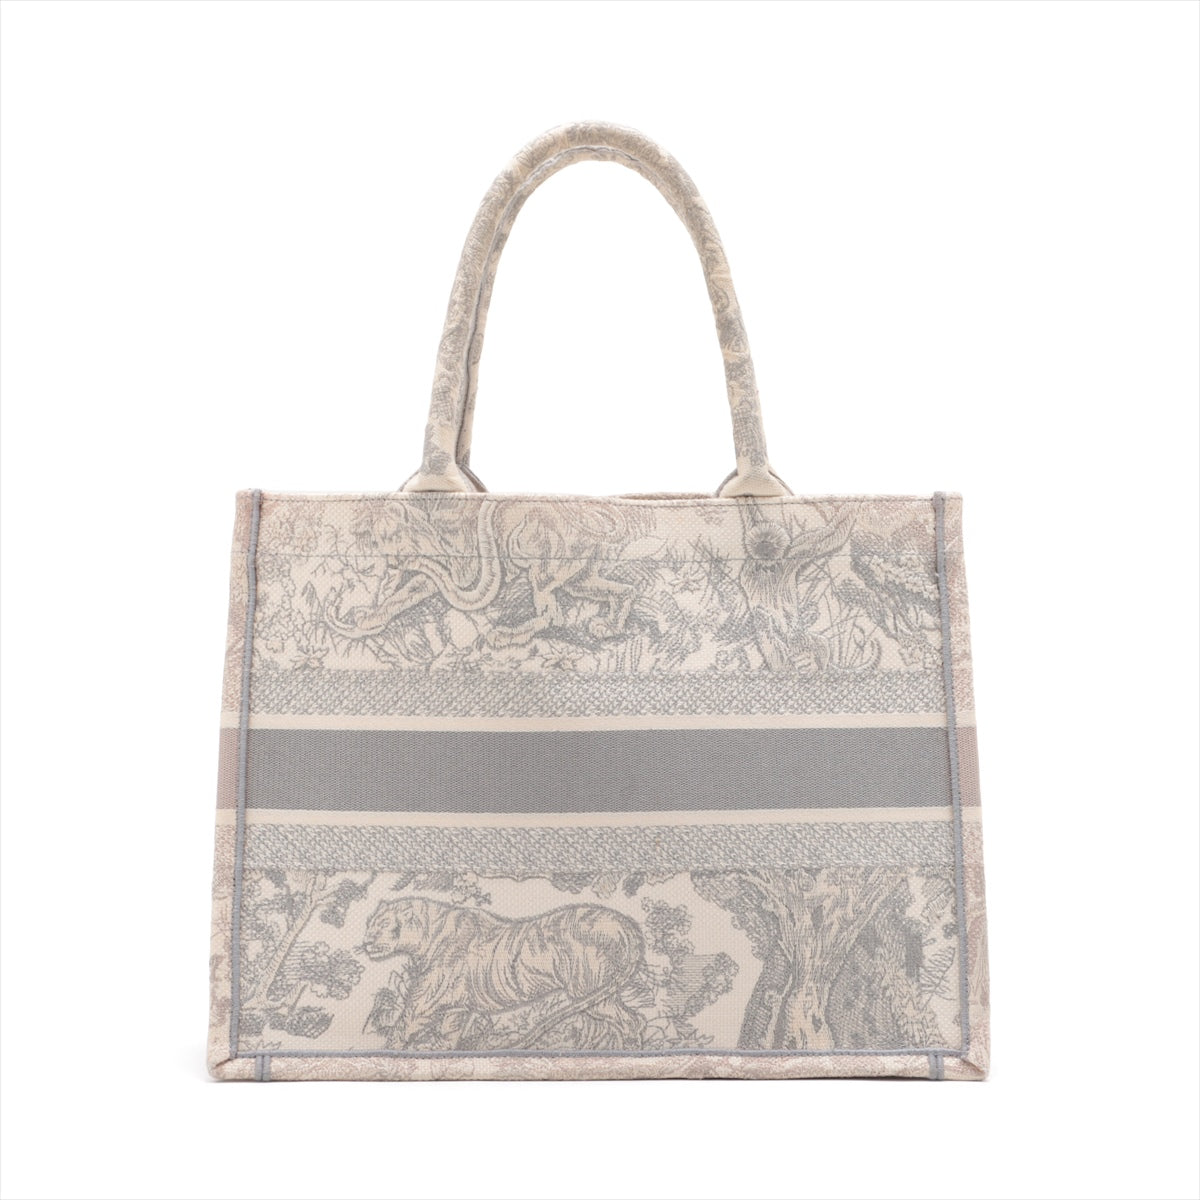 Christian Dior Toile Doo JUY Embroidery Book Tote small canvas Tote bag Grey